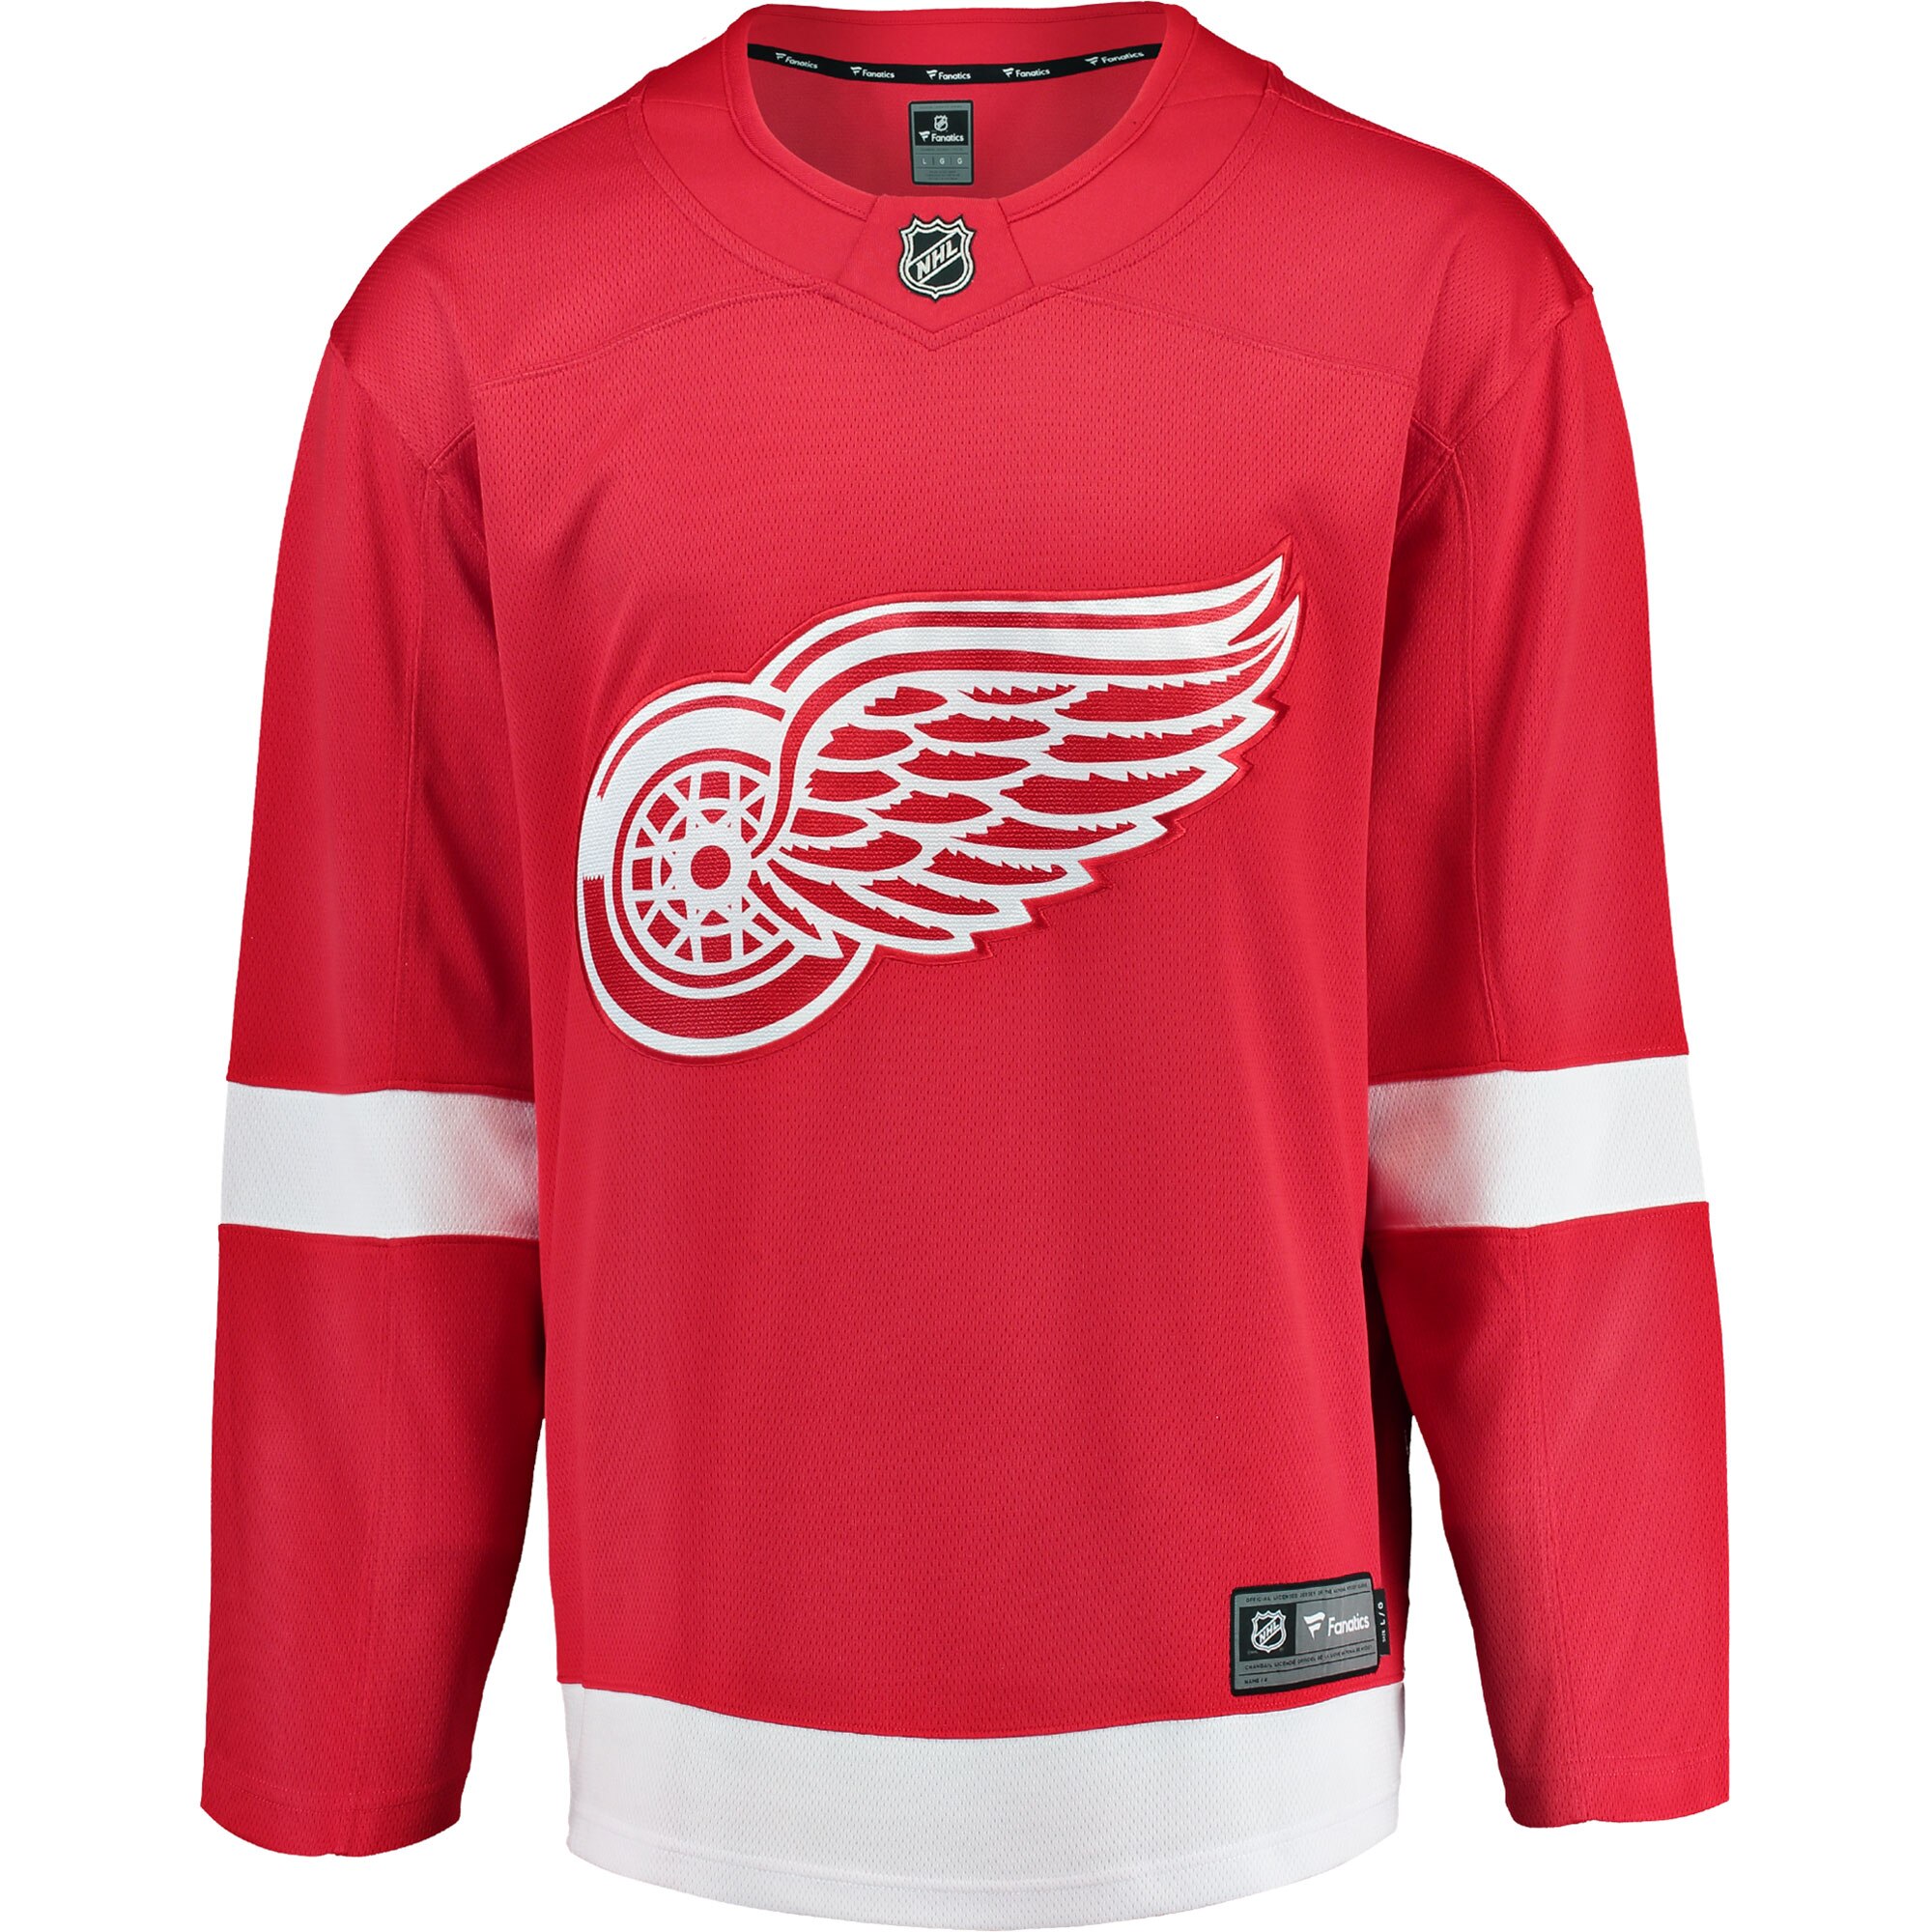 red wings jerseys over the years